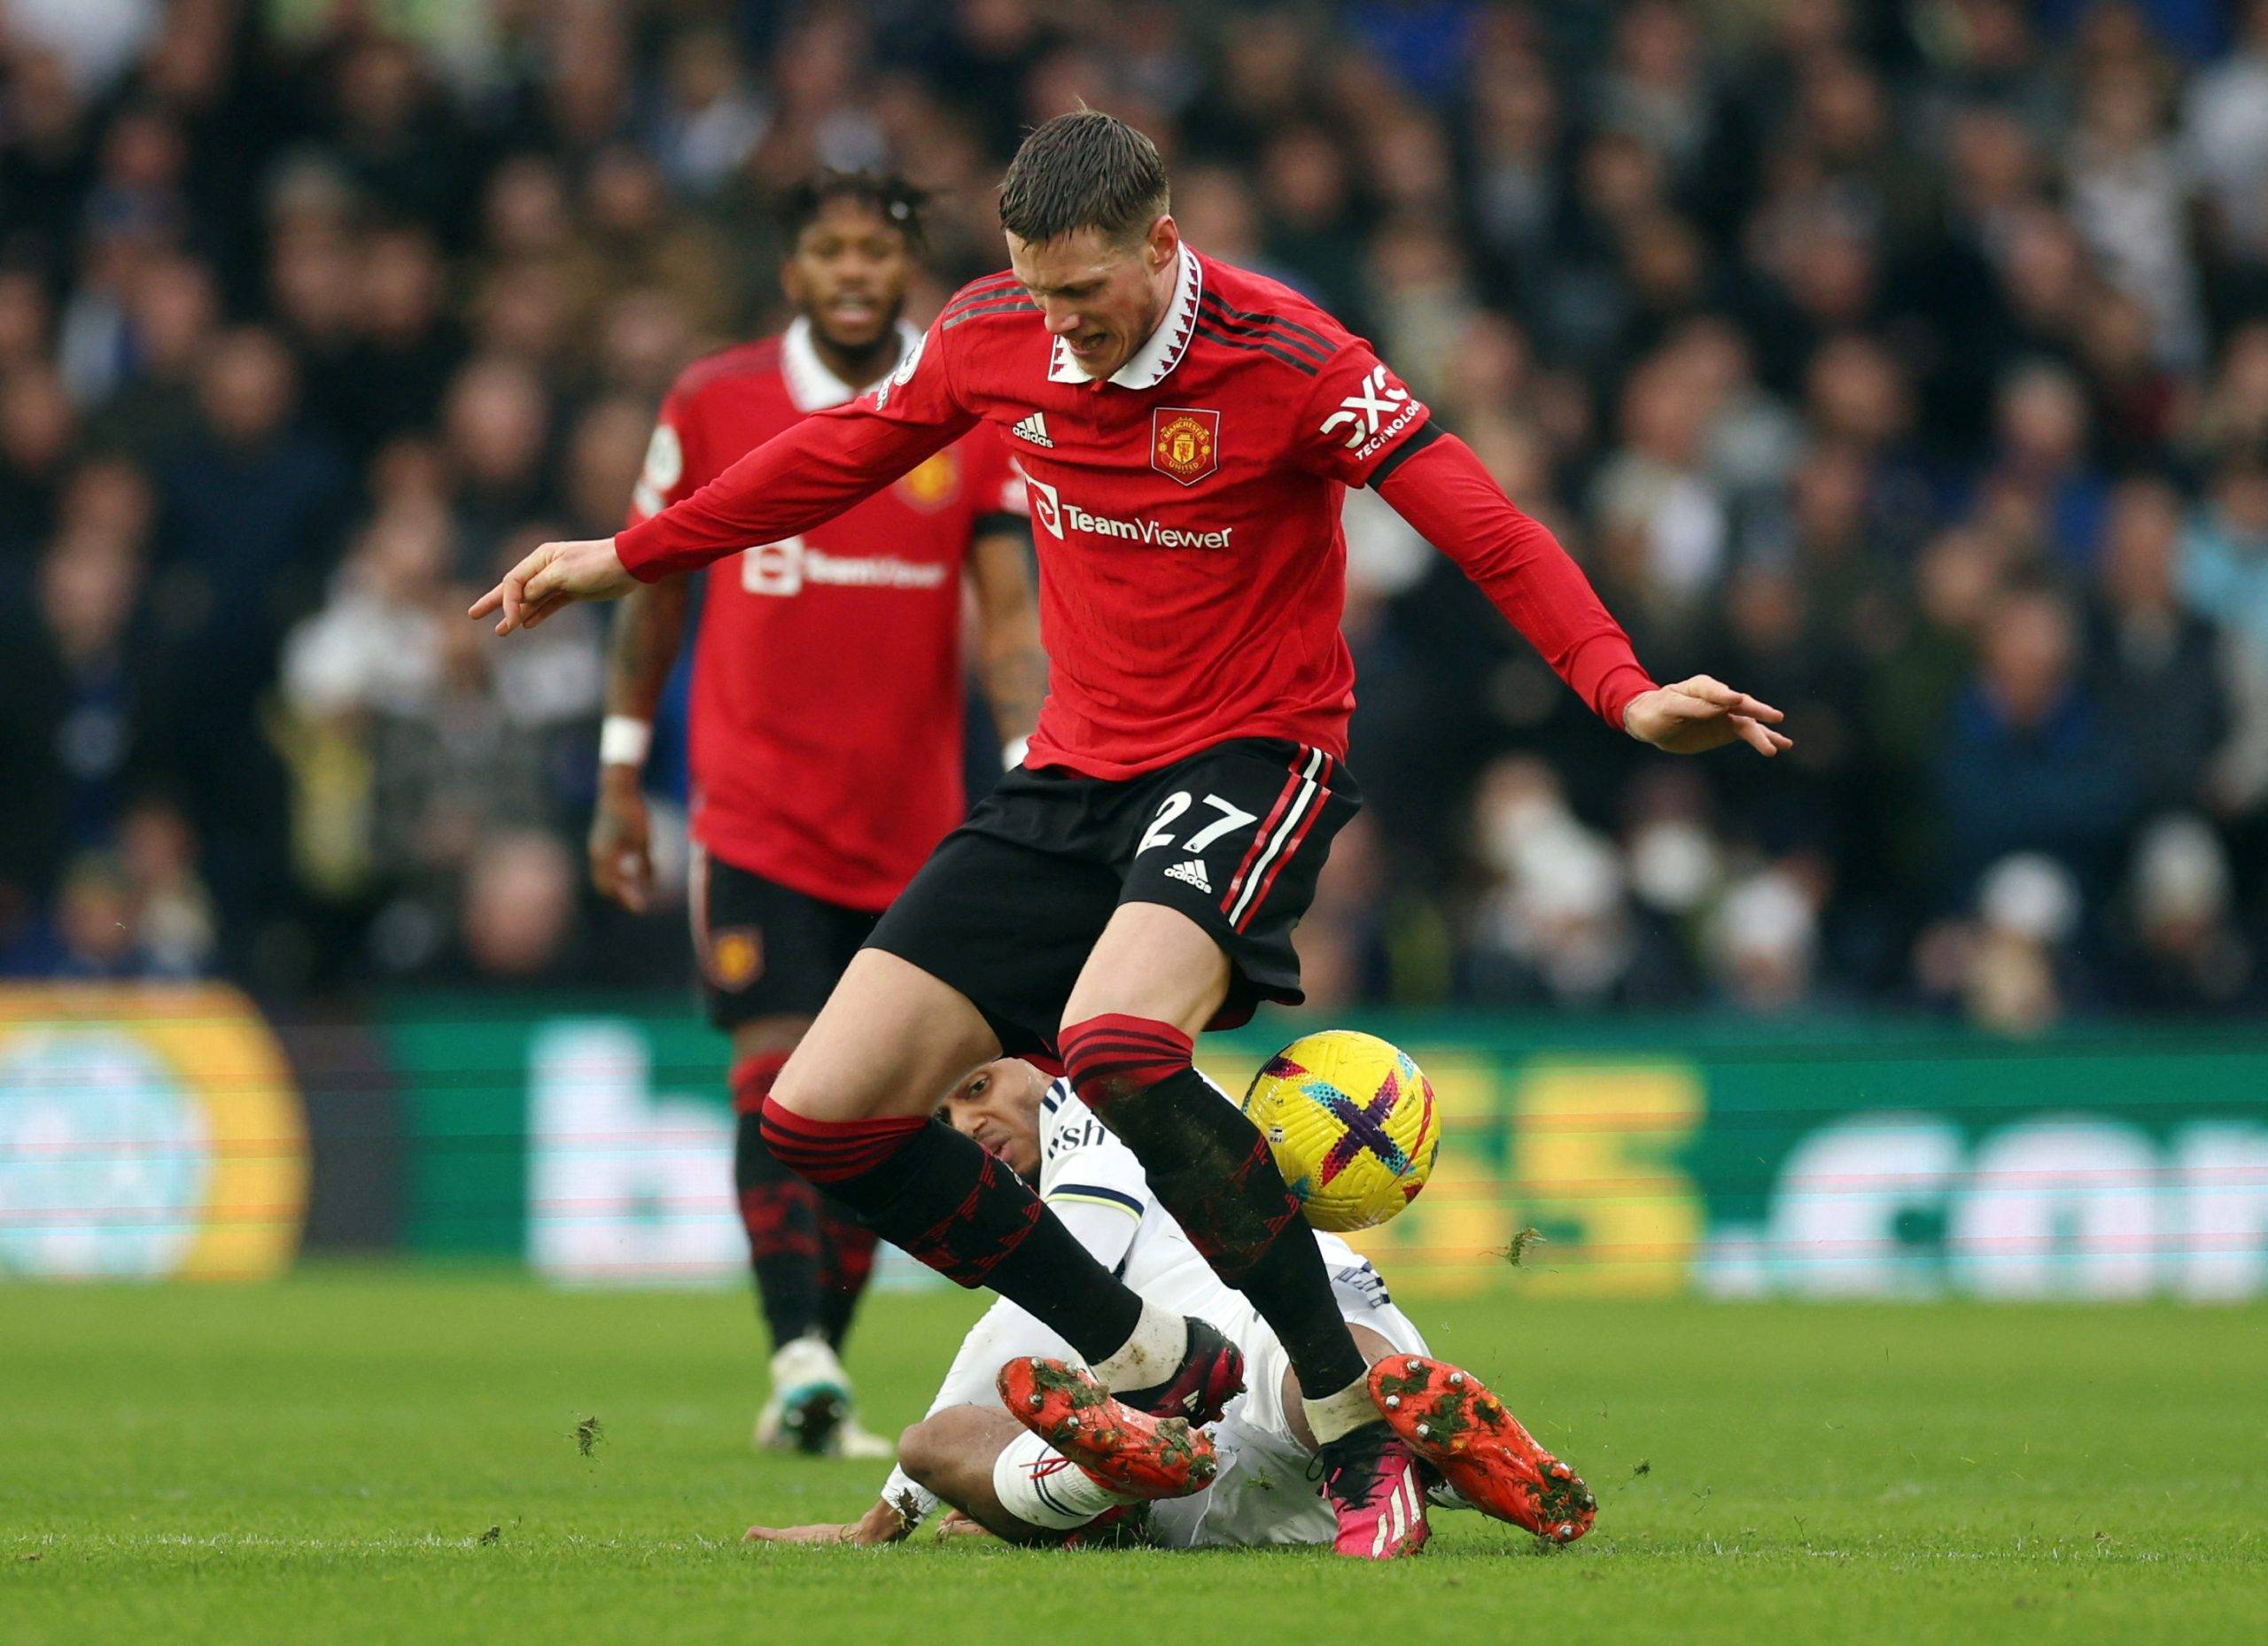 Manchester United: Journalist critical of Wout Weghorst's performance - Follow up